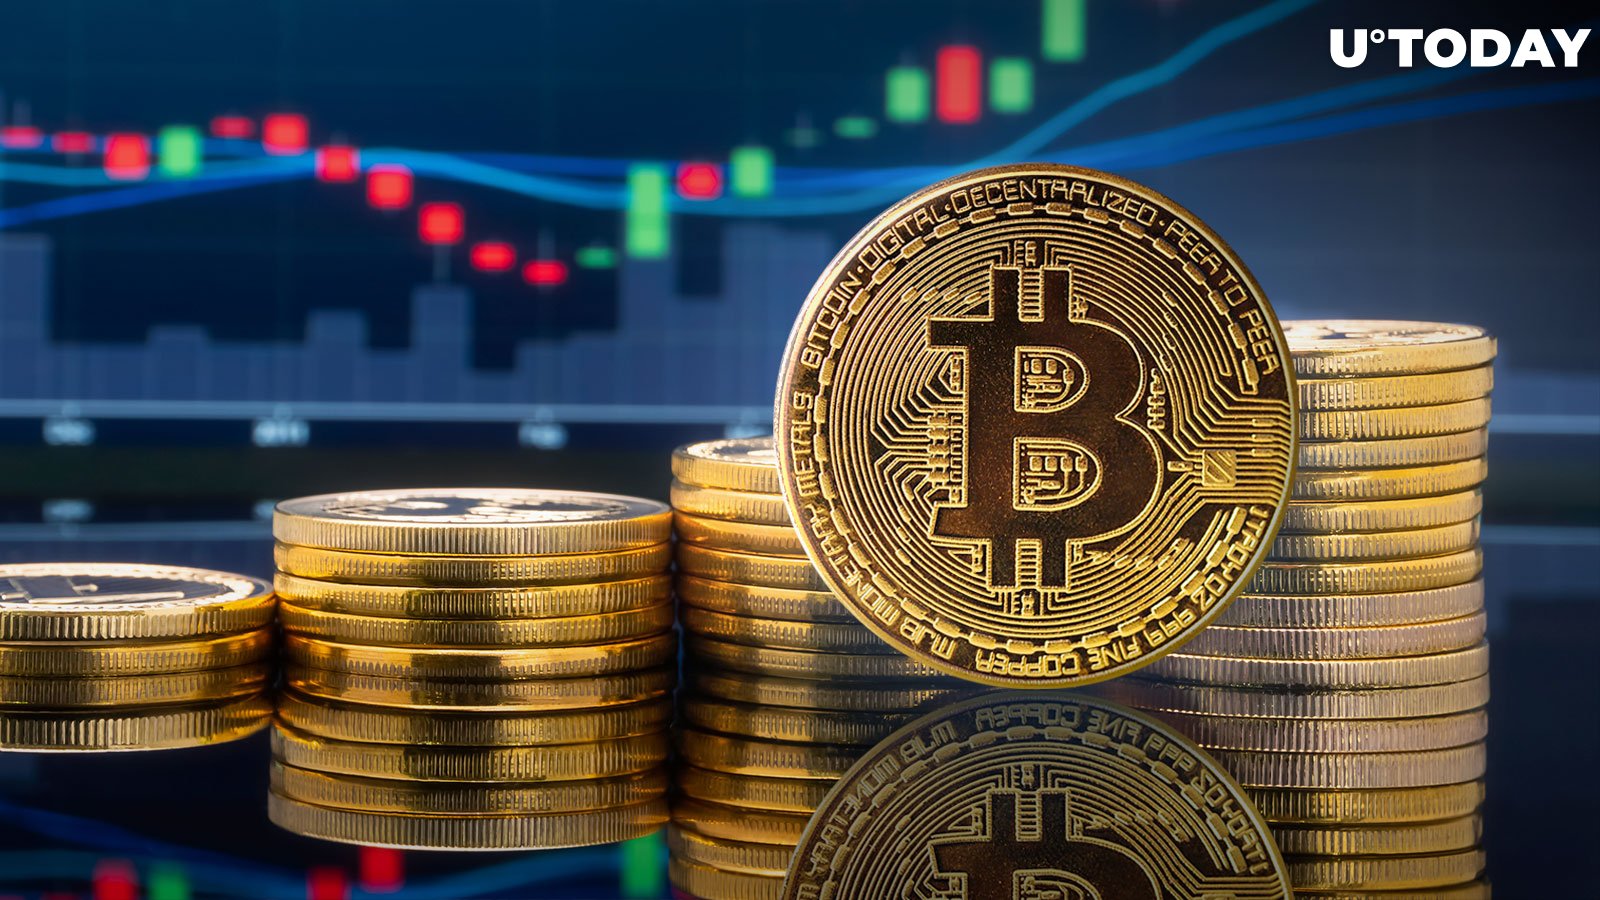 Bitcoin (BTC) to Reach $120,000 as Historical Patterns Repeat, Analyst Says